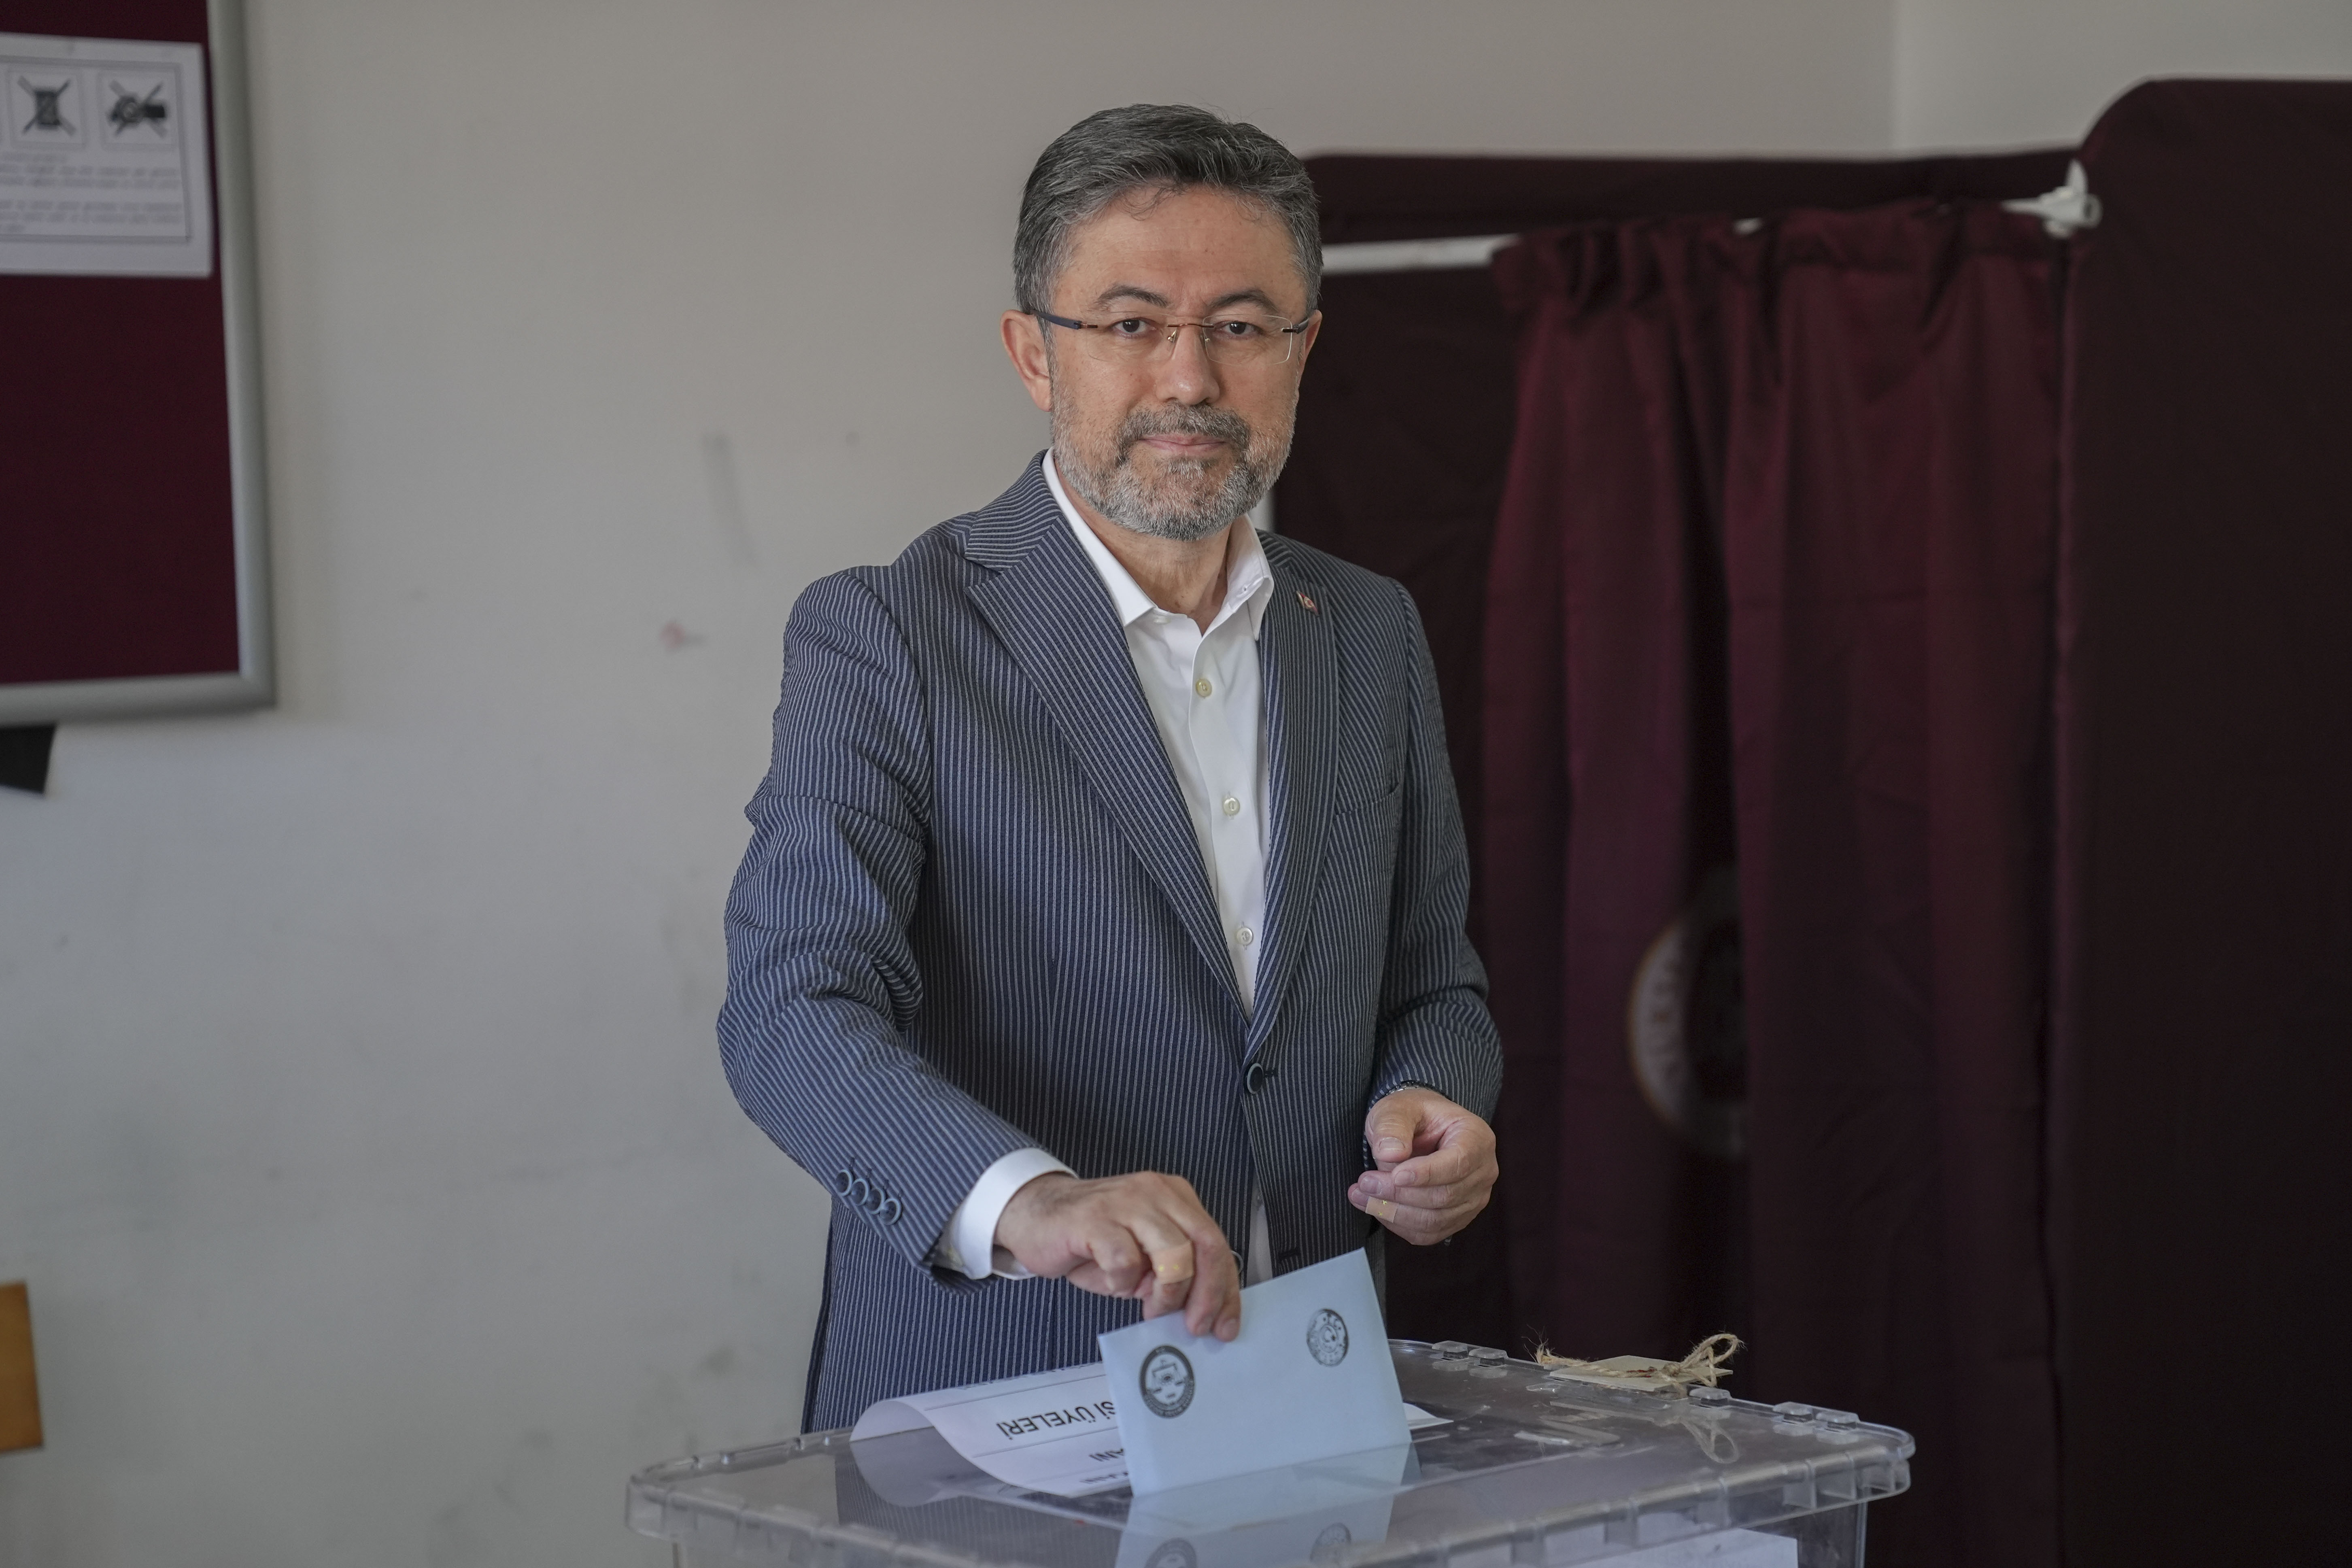 aa-20240331-34140934-34140932-turkish-agriculture-and-forestry-minister-ibrahim-yumakli-casts-his-ballot-in-ankara.jpg